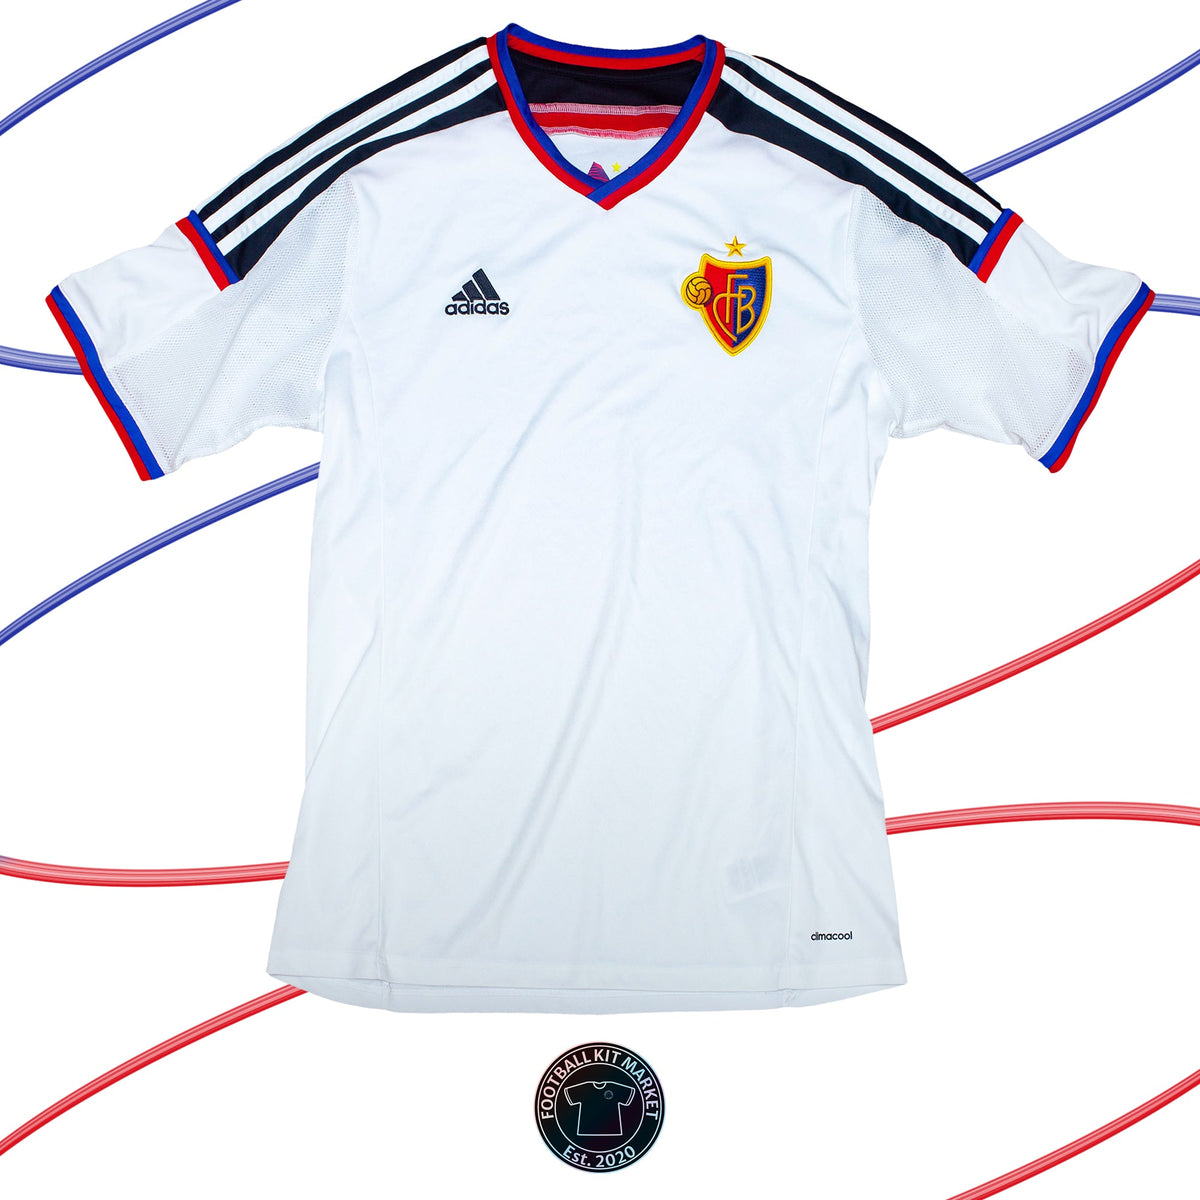 Genuine FC BASEL Away (2015-2016) - ADIDAS (L) - Product Image from Football Kit Market